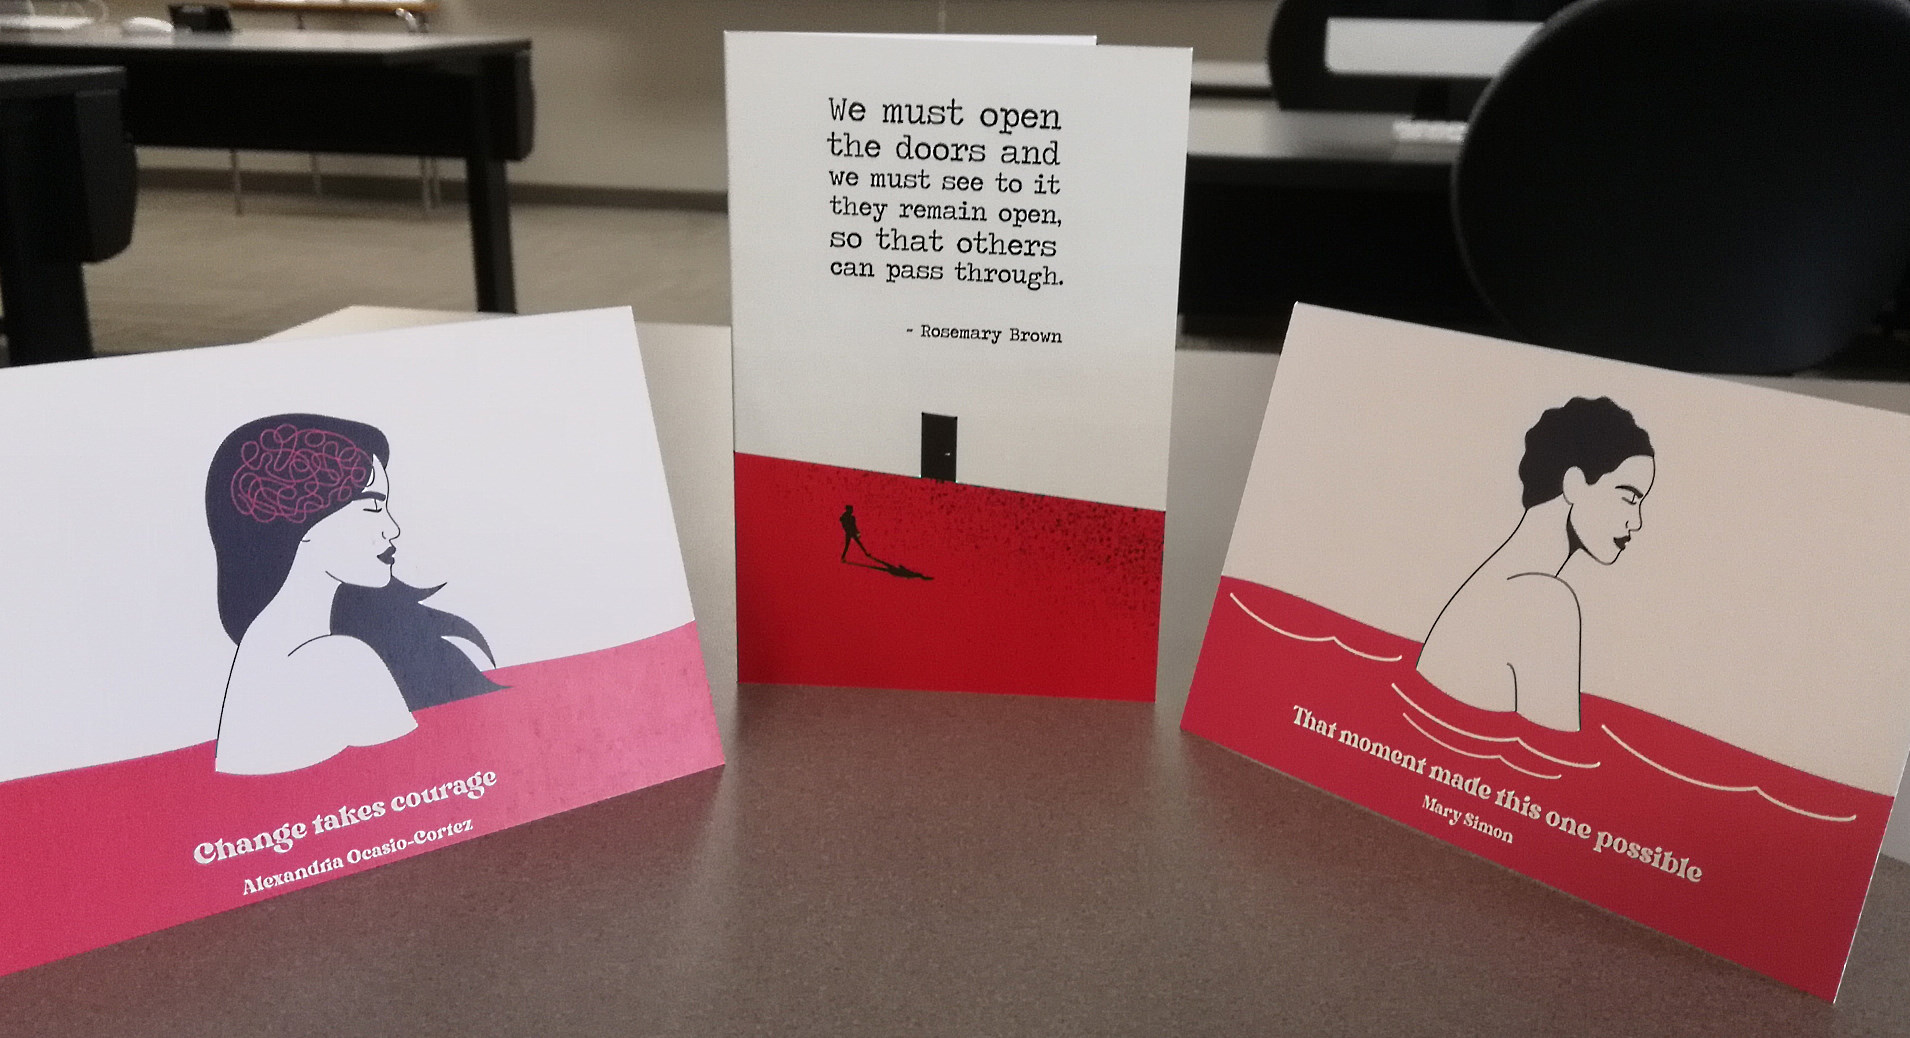 Three greeting cards sitting upright on a desk. Each card has quotes from famous women with stark shape-based illustrations of Women moving through doors, climbing mountains, and sitting alone.